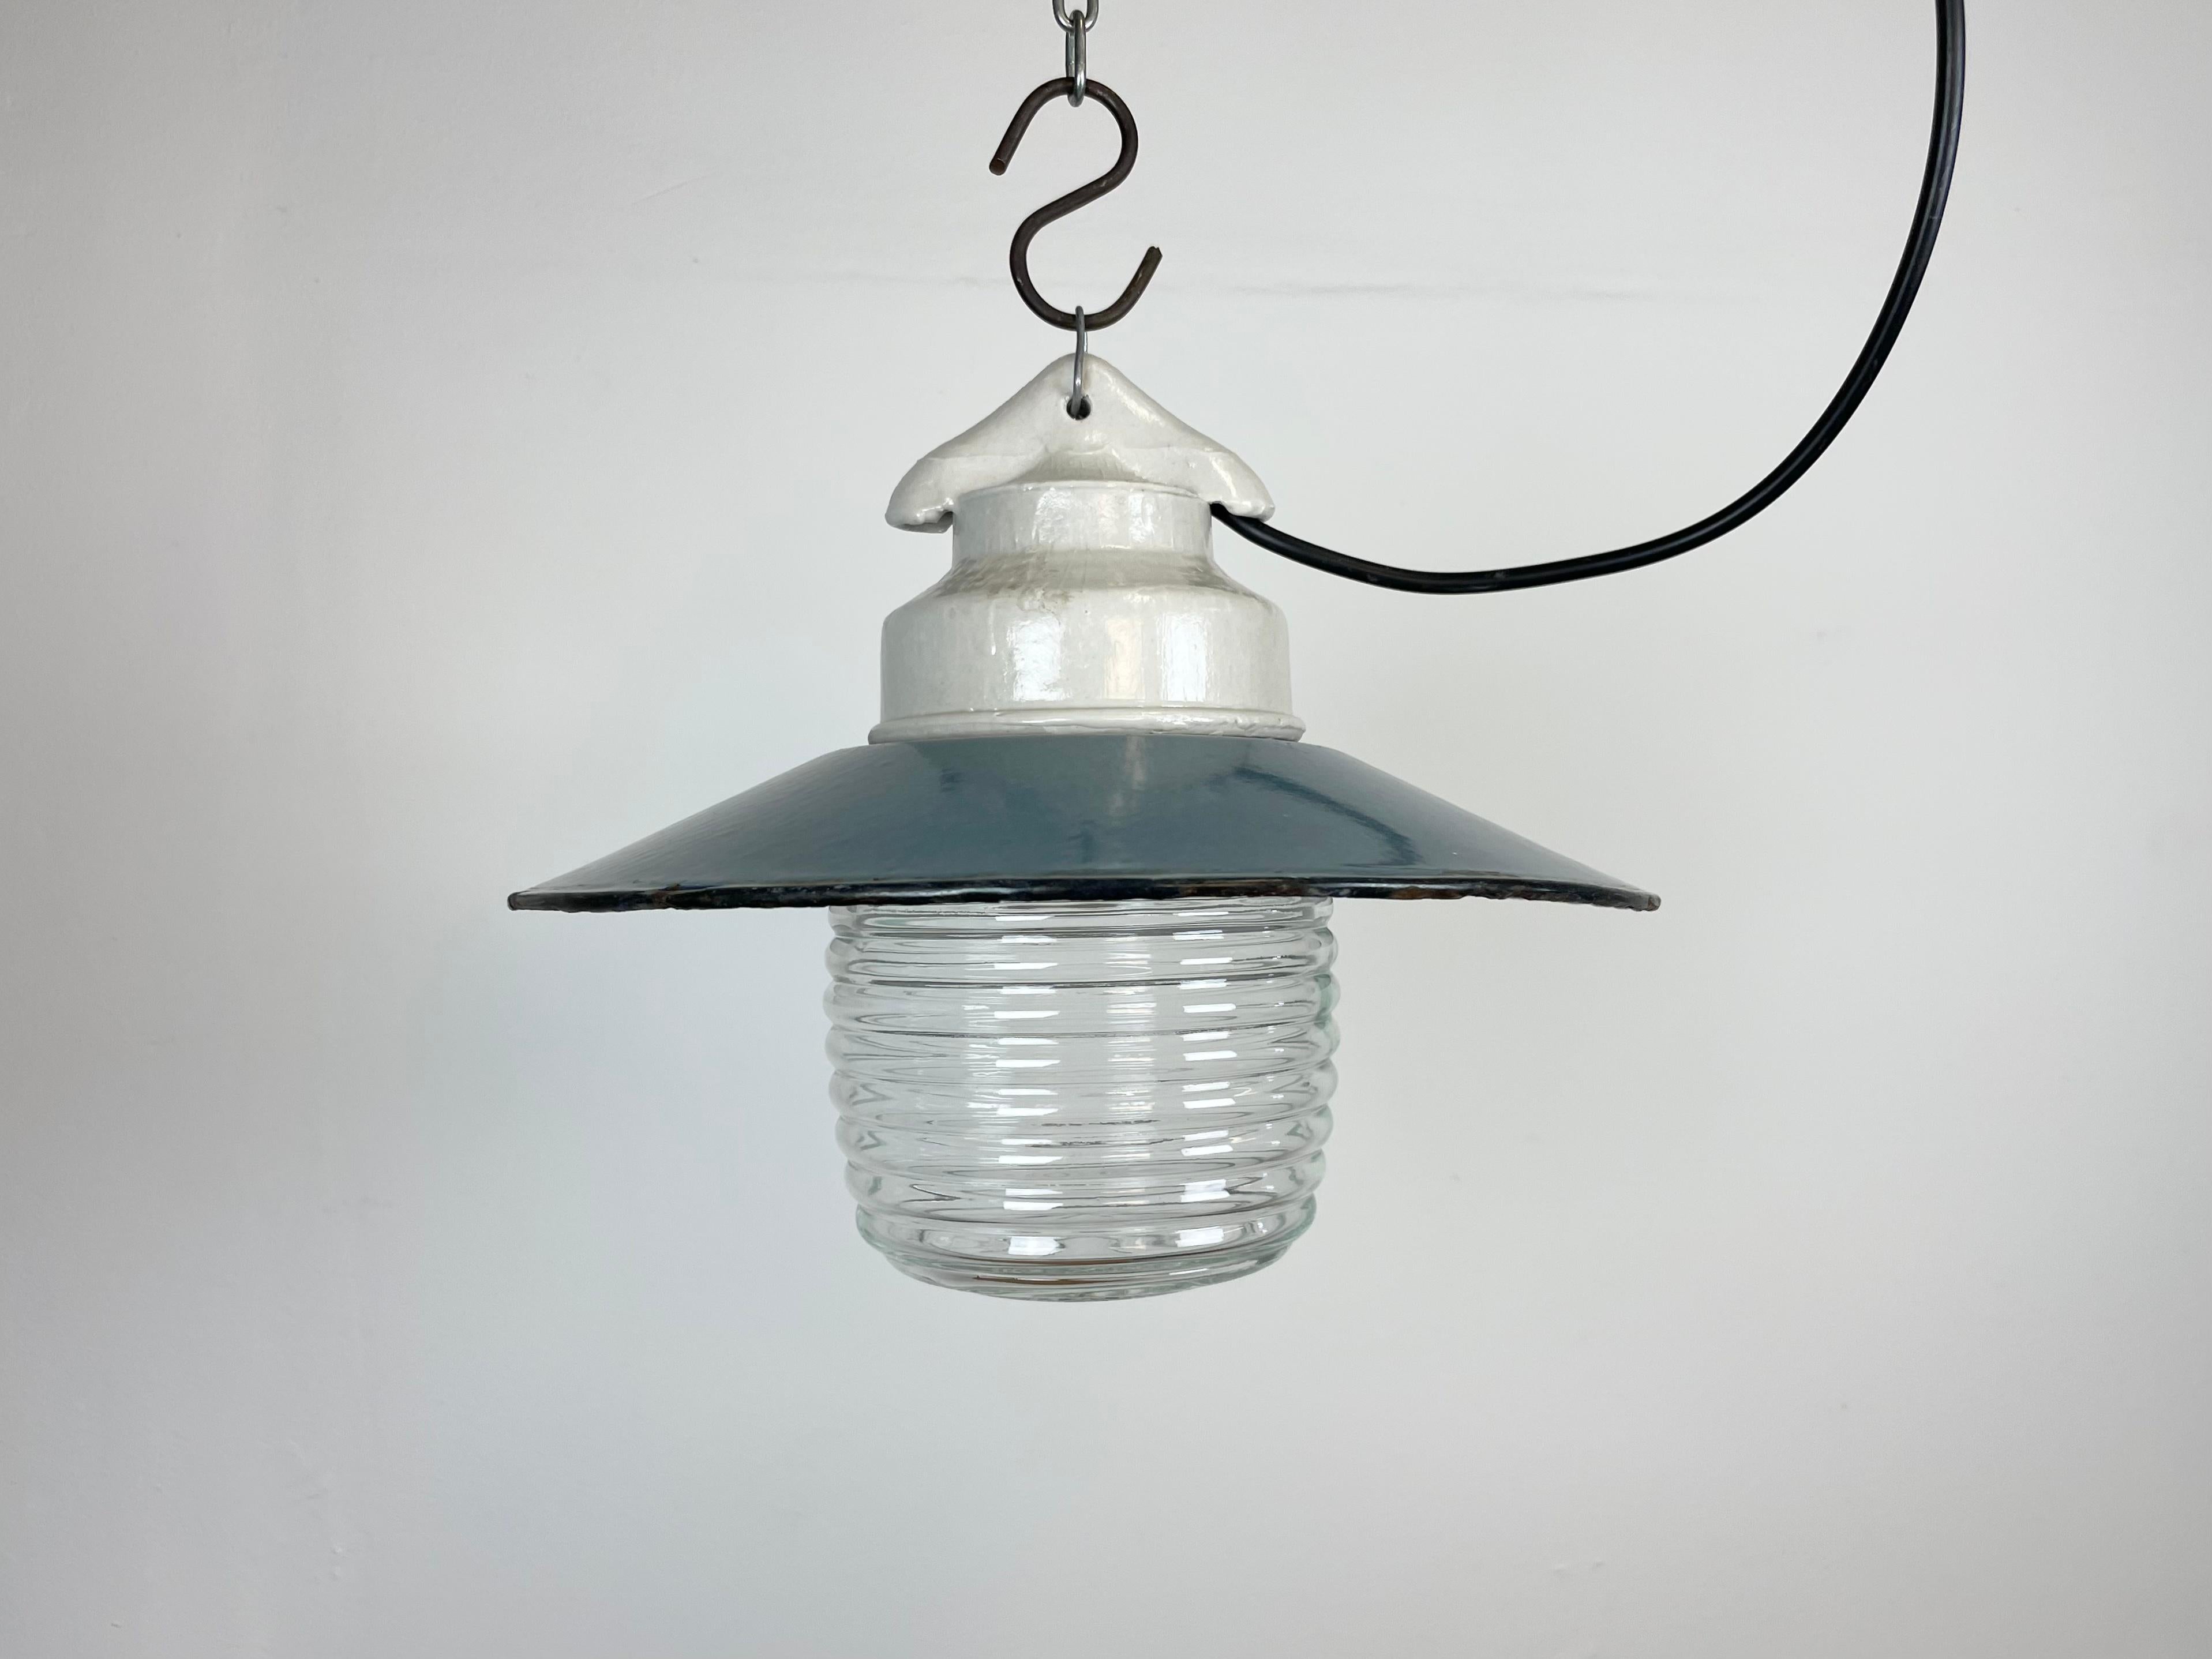 Vintage industrial light made in former Soviet Union during the 1970s.It features white porcelain top, a blue enamel shade with white enamel interior and ribbed clear glass cover. The socket requires E27/ E26  light bulbs. New wire. The weight of